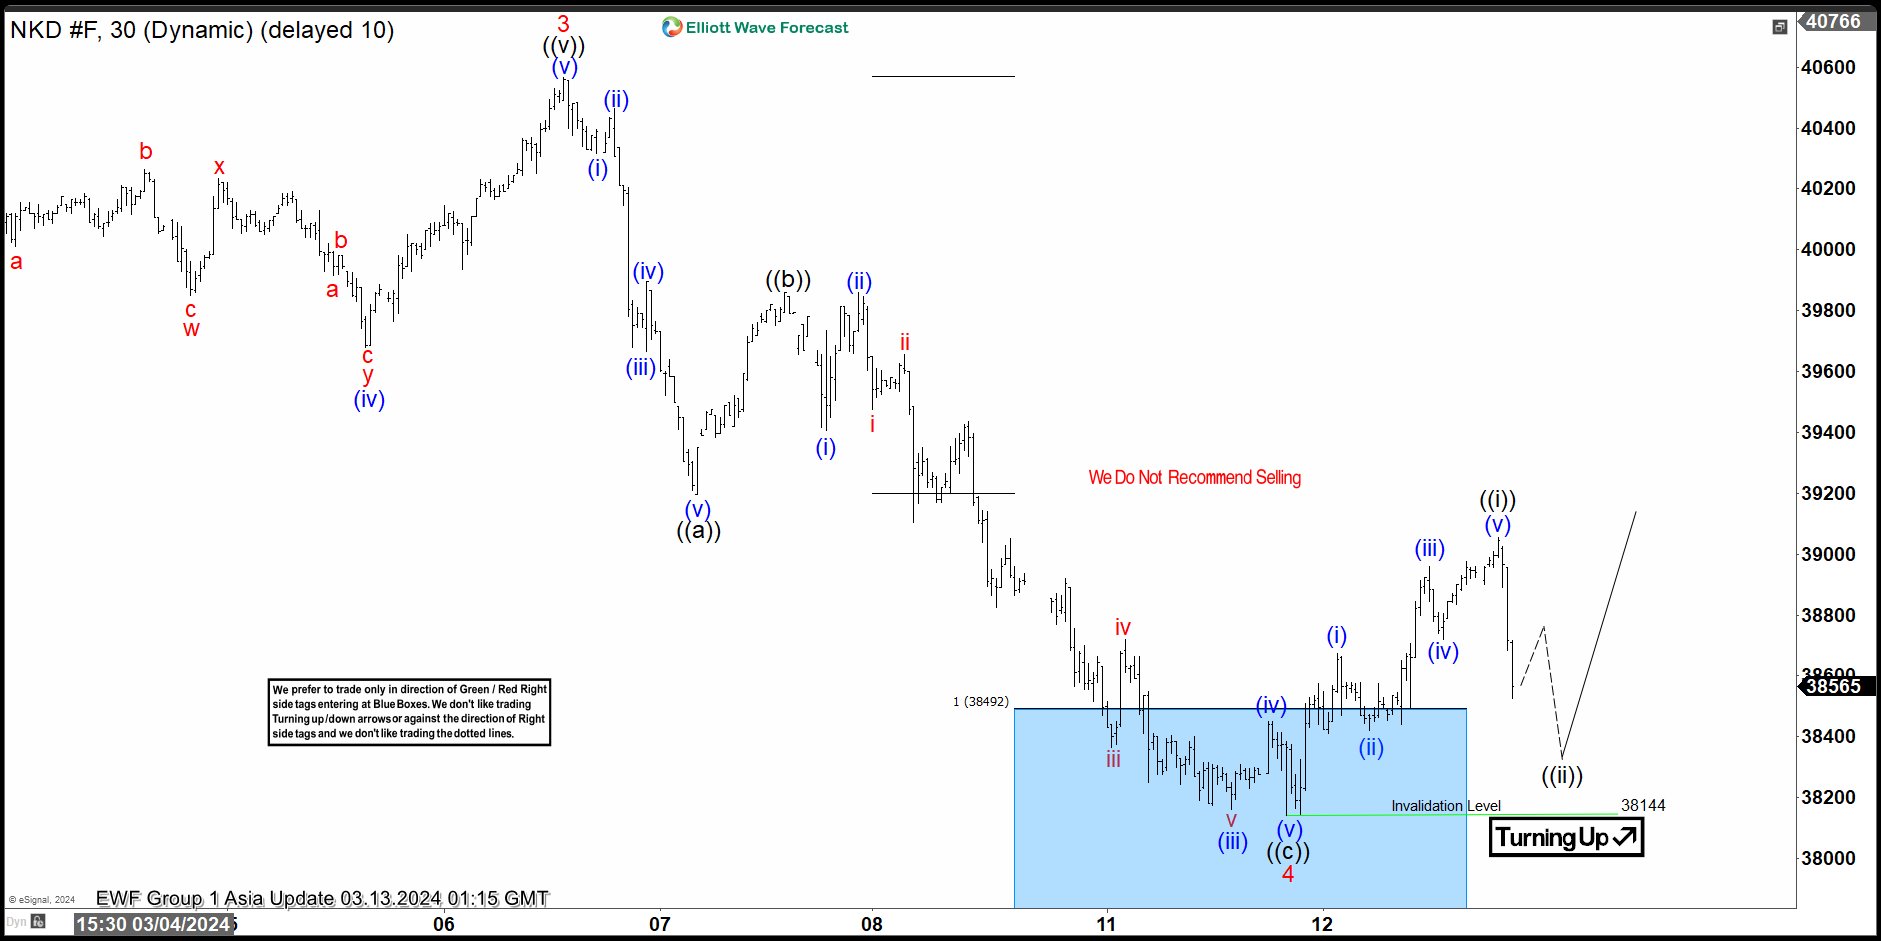 Nikkei ( NKD_F ) Elliott Wave View: Reacted from the Blue Box